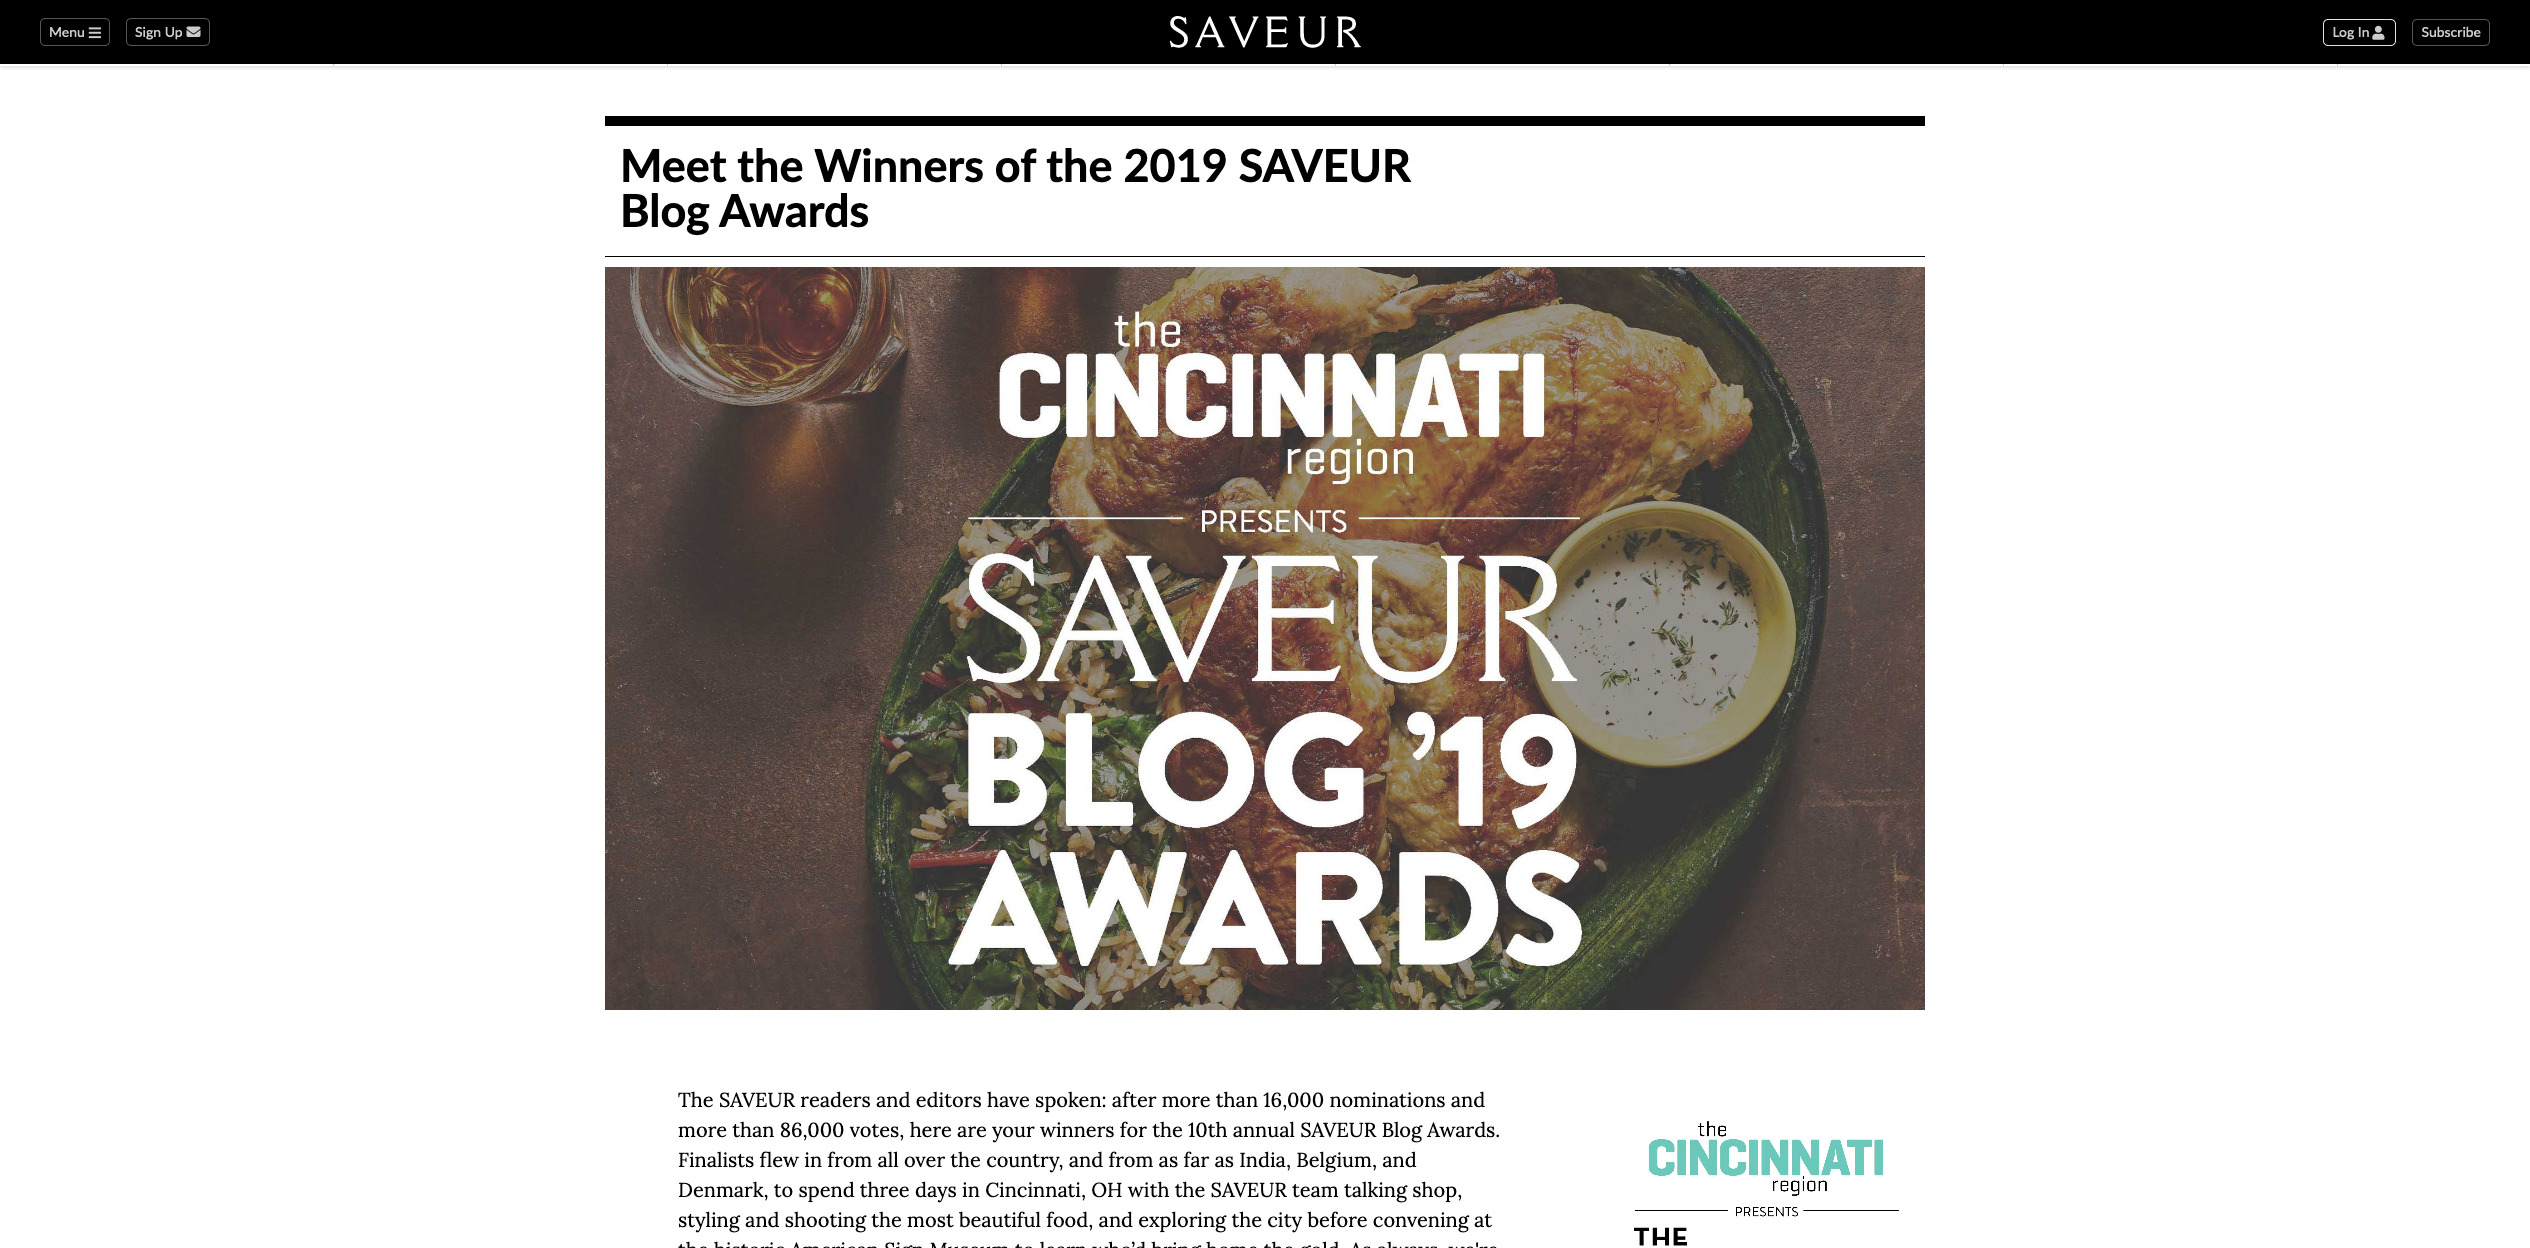 food photography awards contest, saveur blog awards competitions, phoode